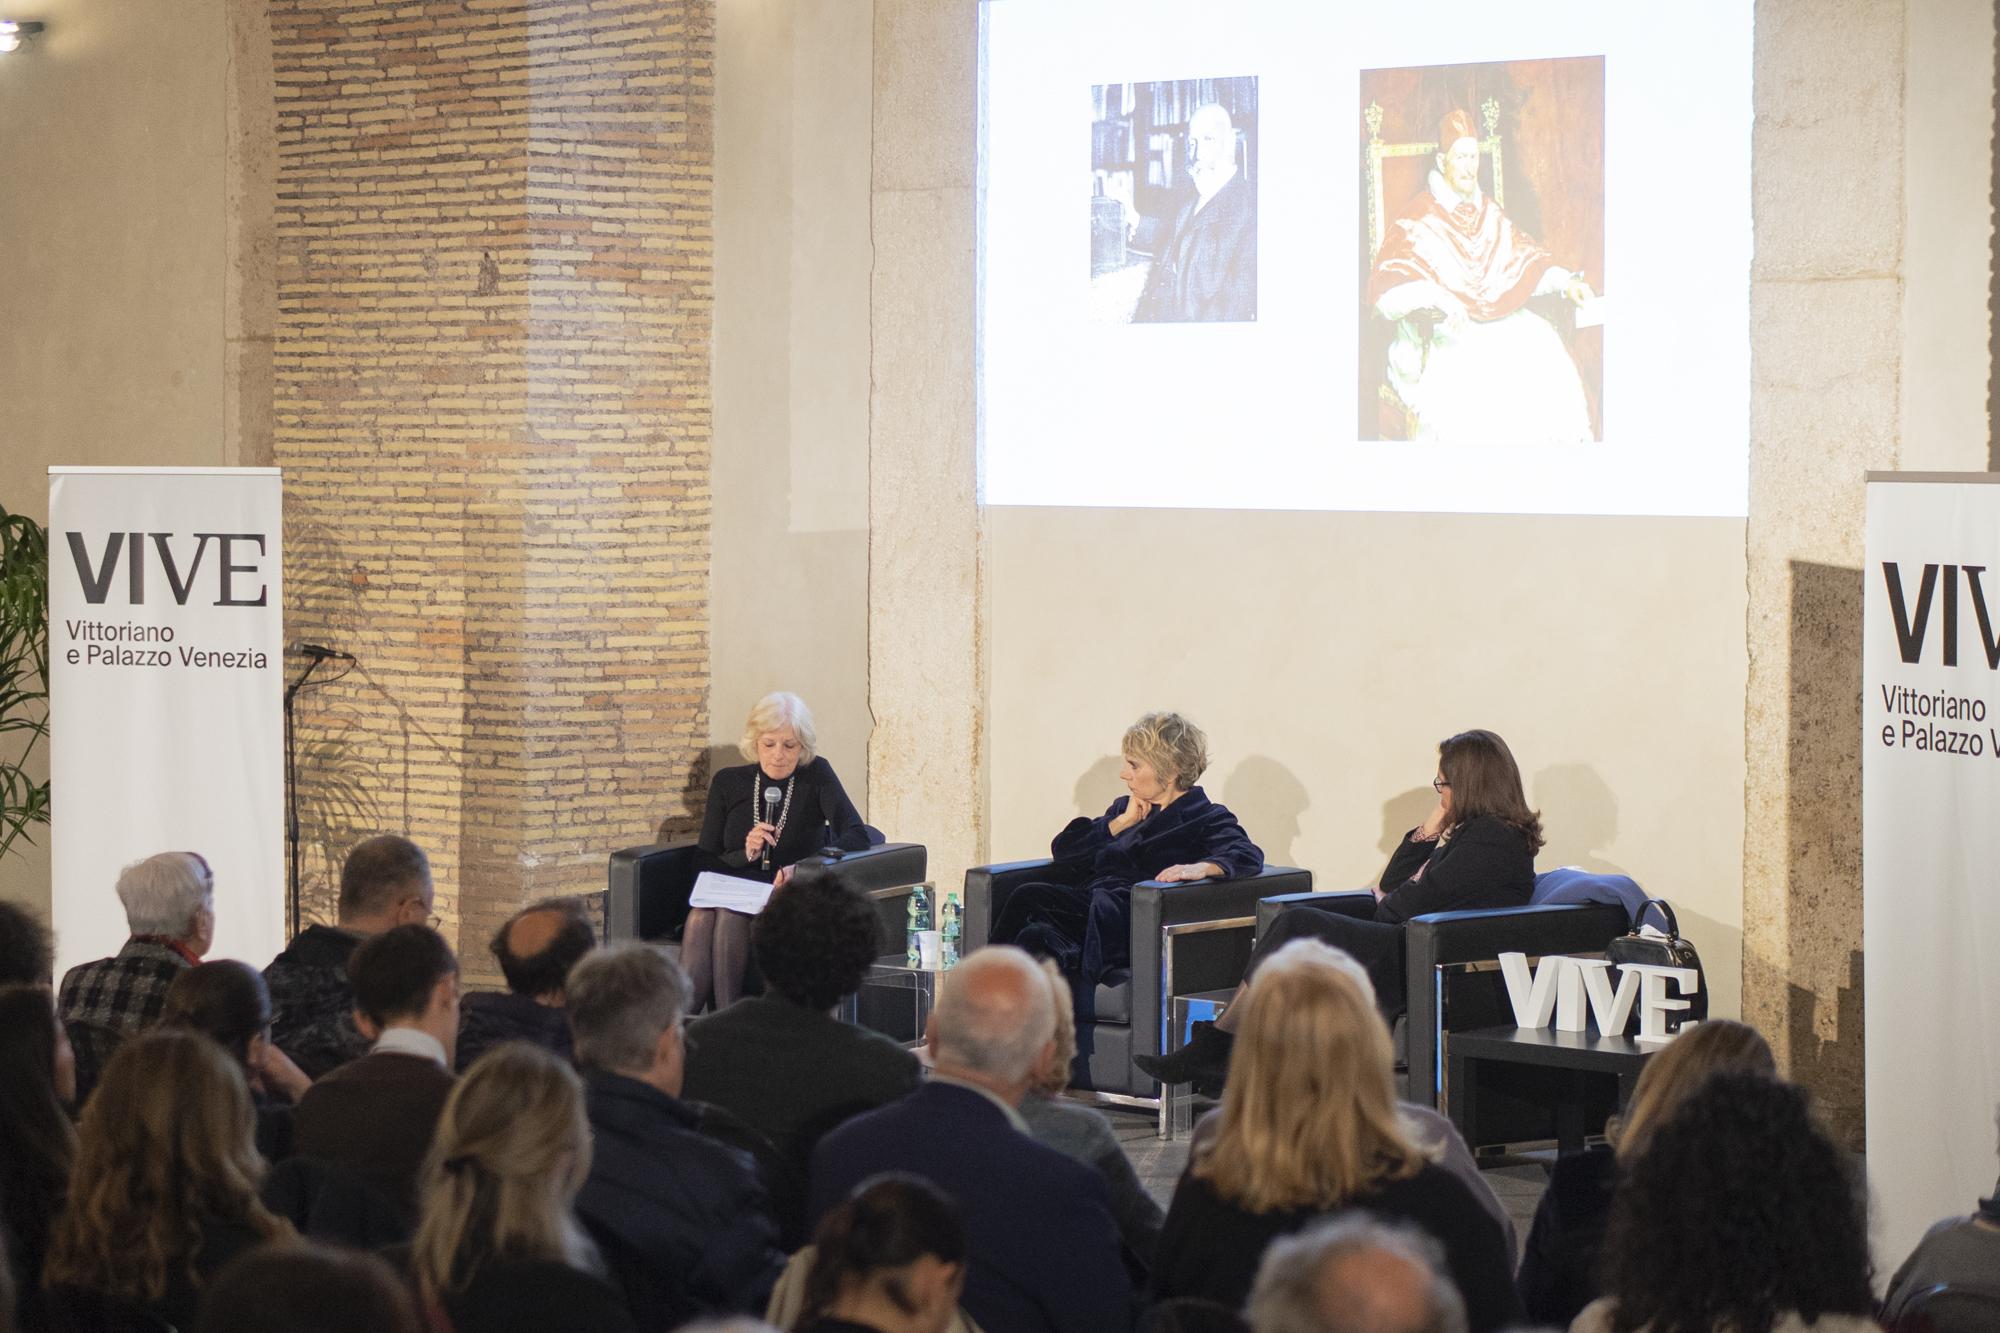 Rome’s collections and museums – a training ground for connoisseurs 